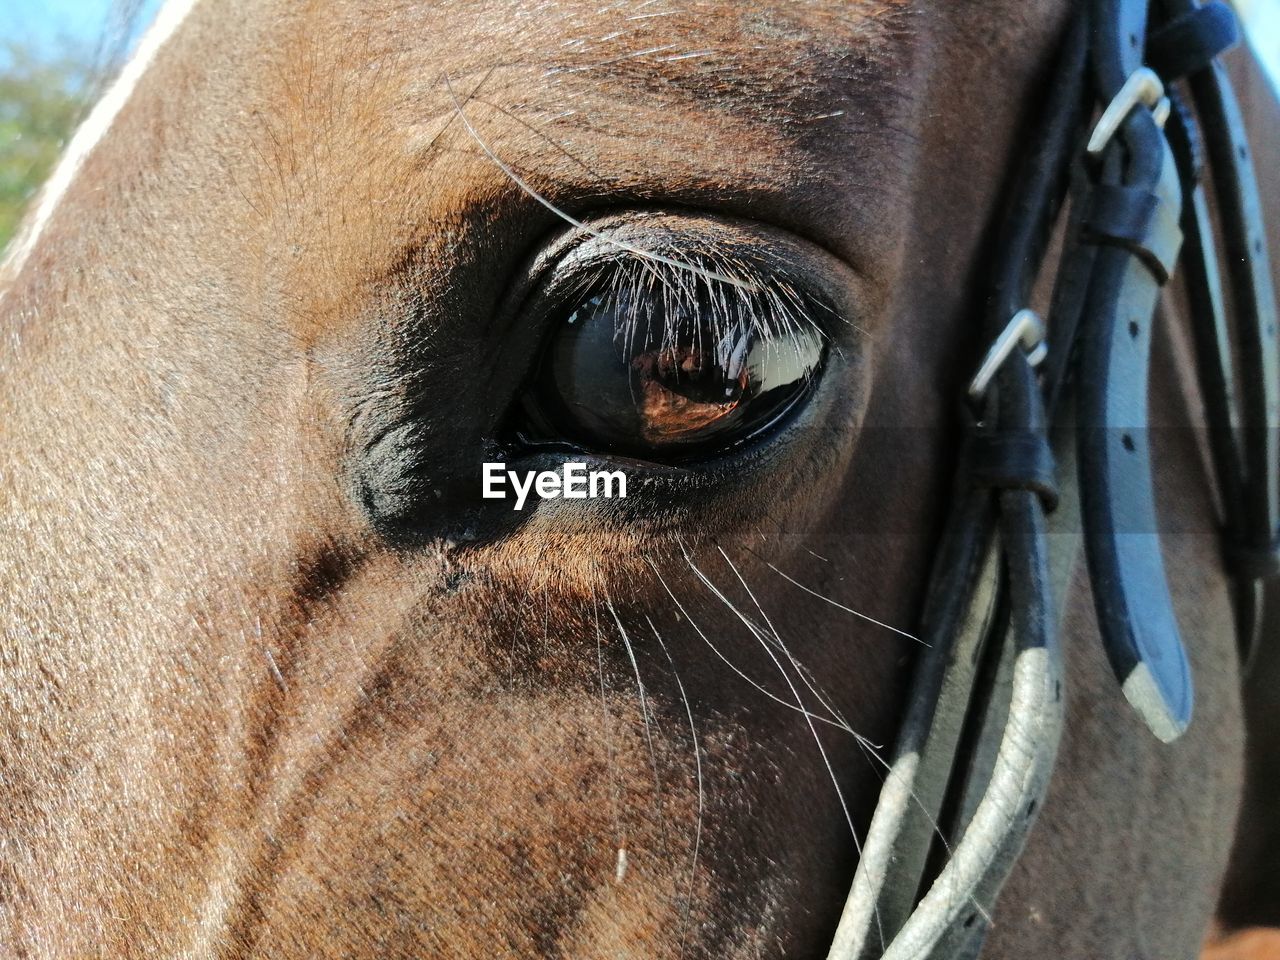 A brown horse looking into the camera close-up with a bridle on it